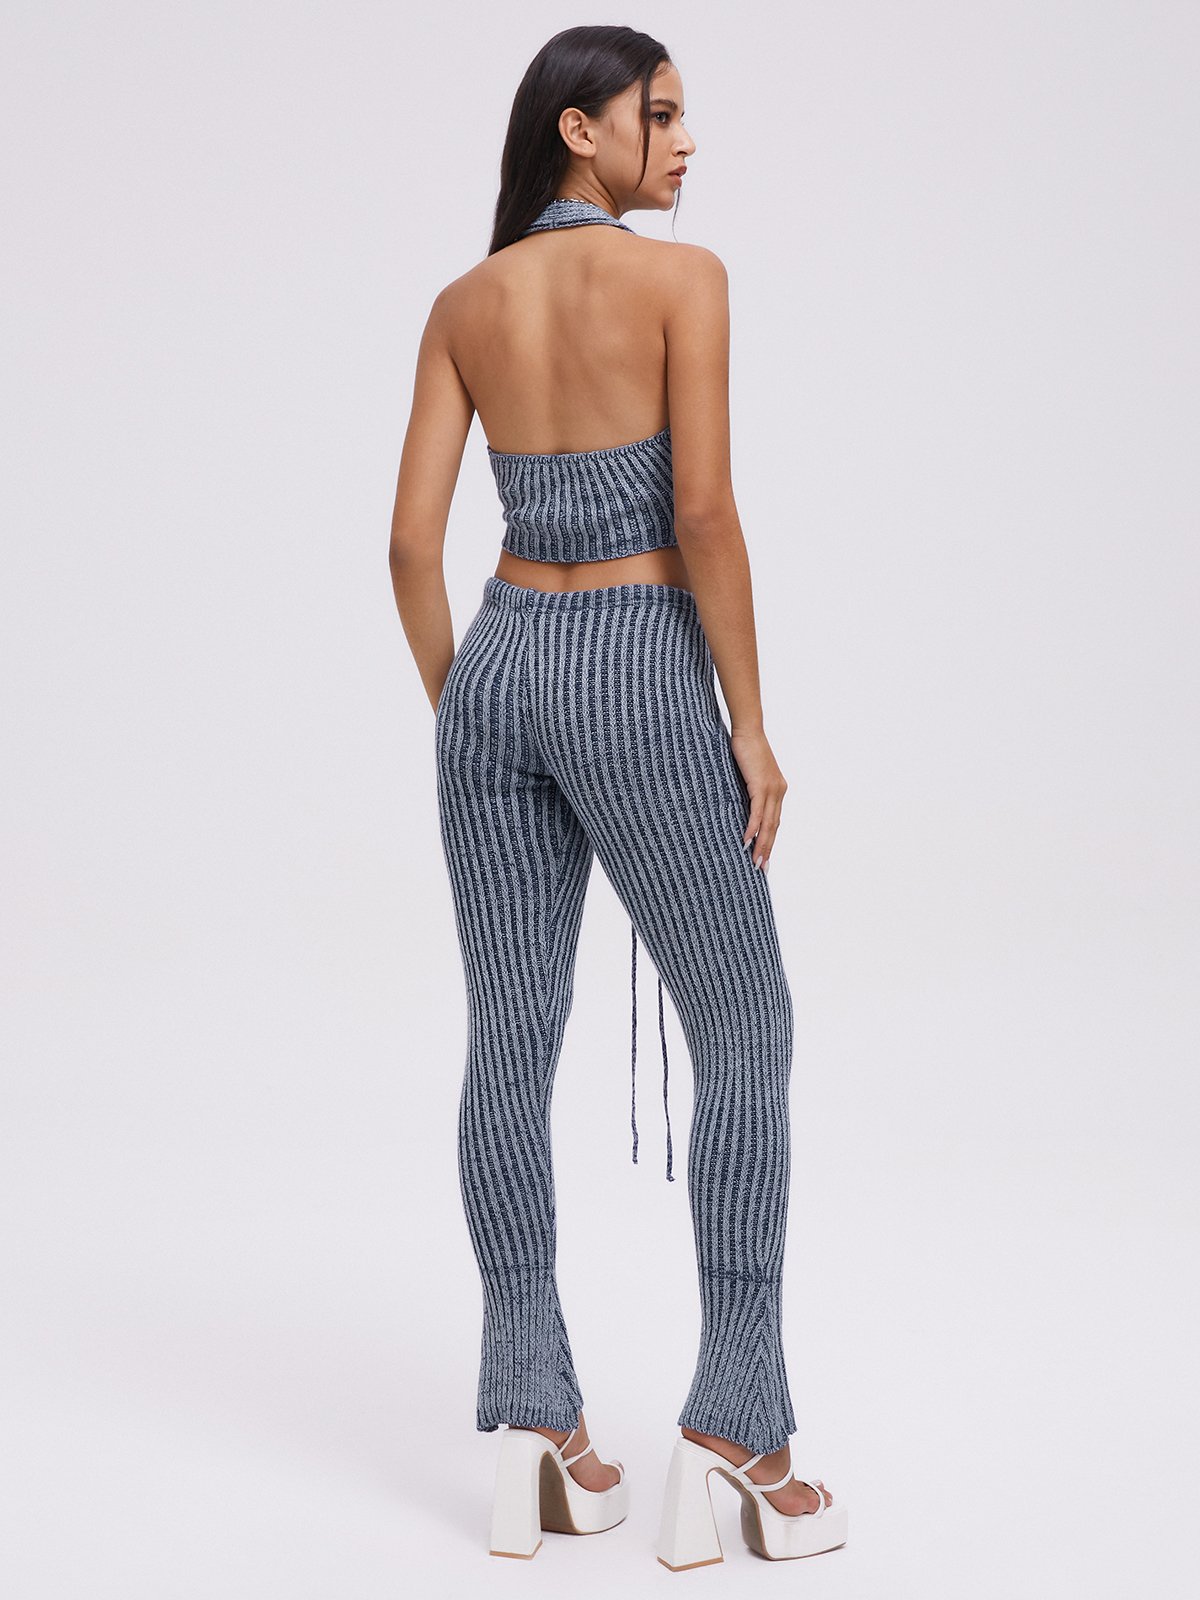 Halter Polka Dots Crop Top With Pants Two-Piece Set